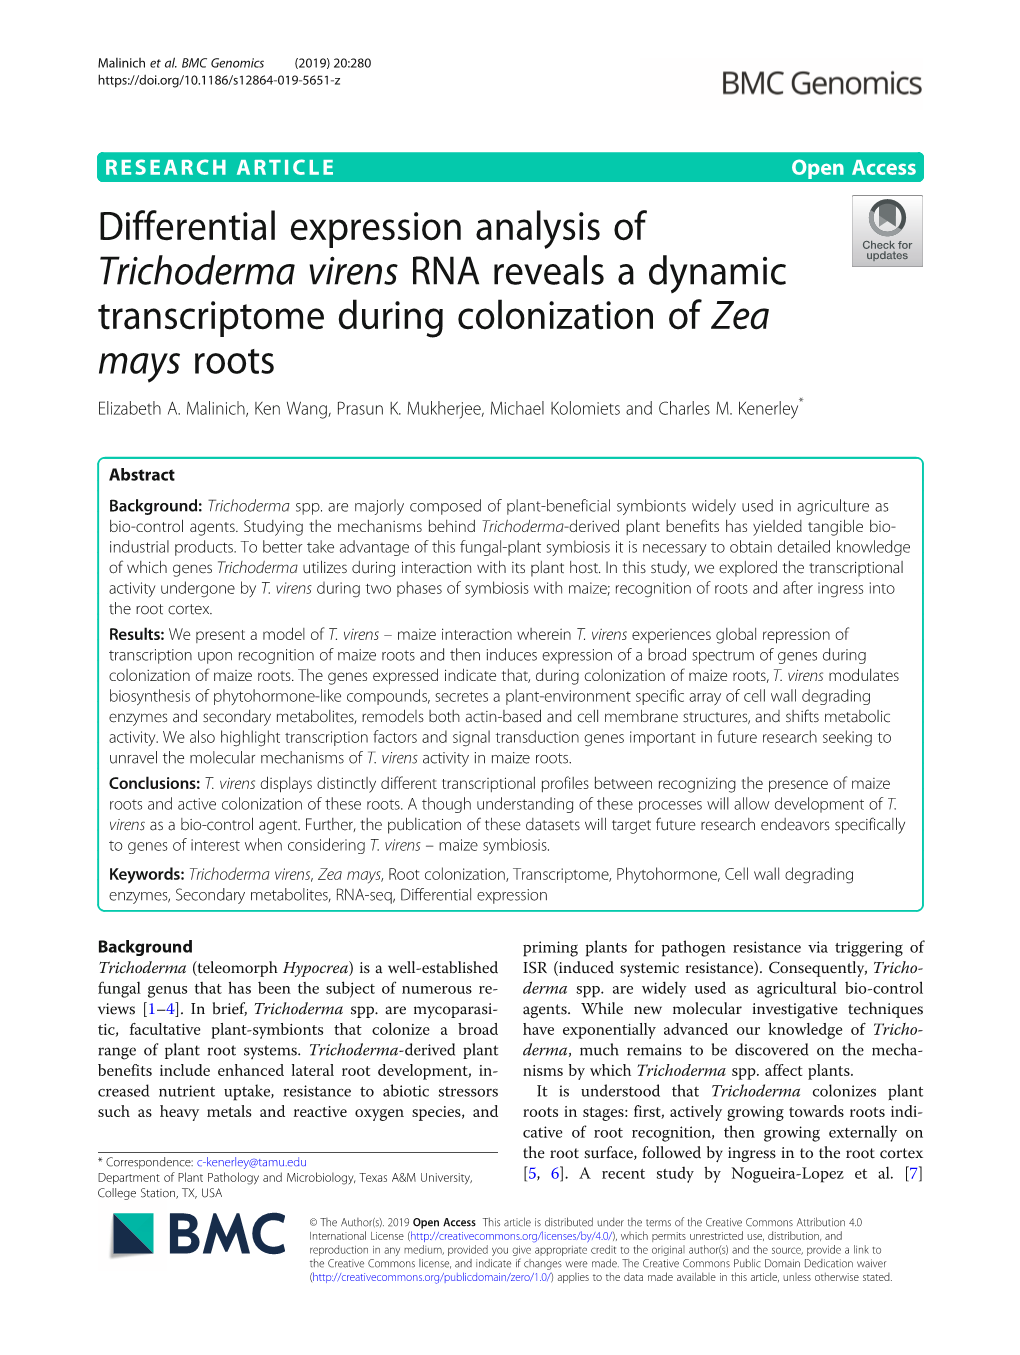 Differential Expression Analysis of Trichoderma Virens RNA Reveals a Dynamic Transcriptome During Colonization of Zea Mays Roots Elizabeth A